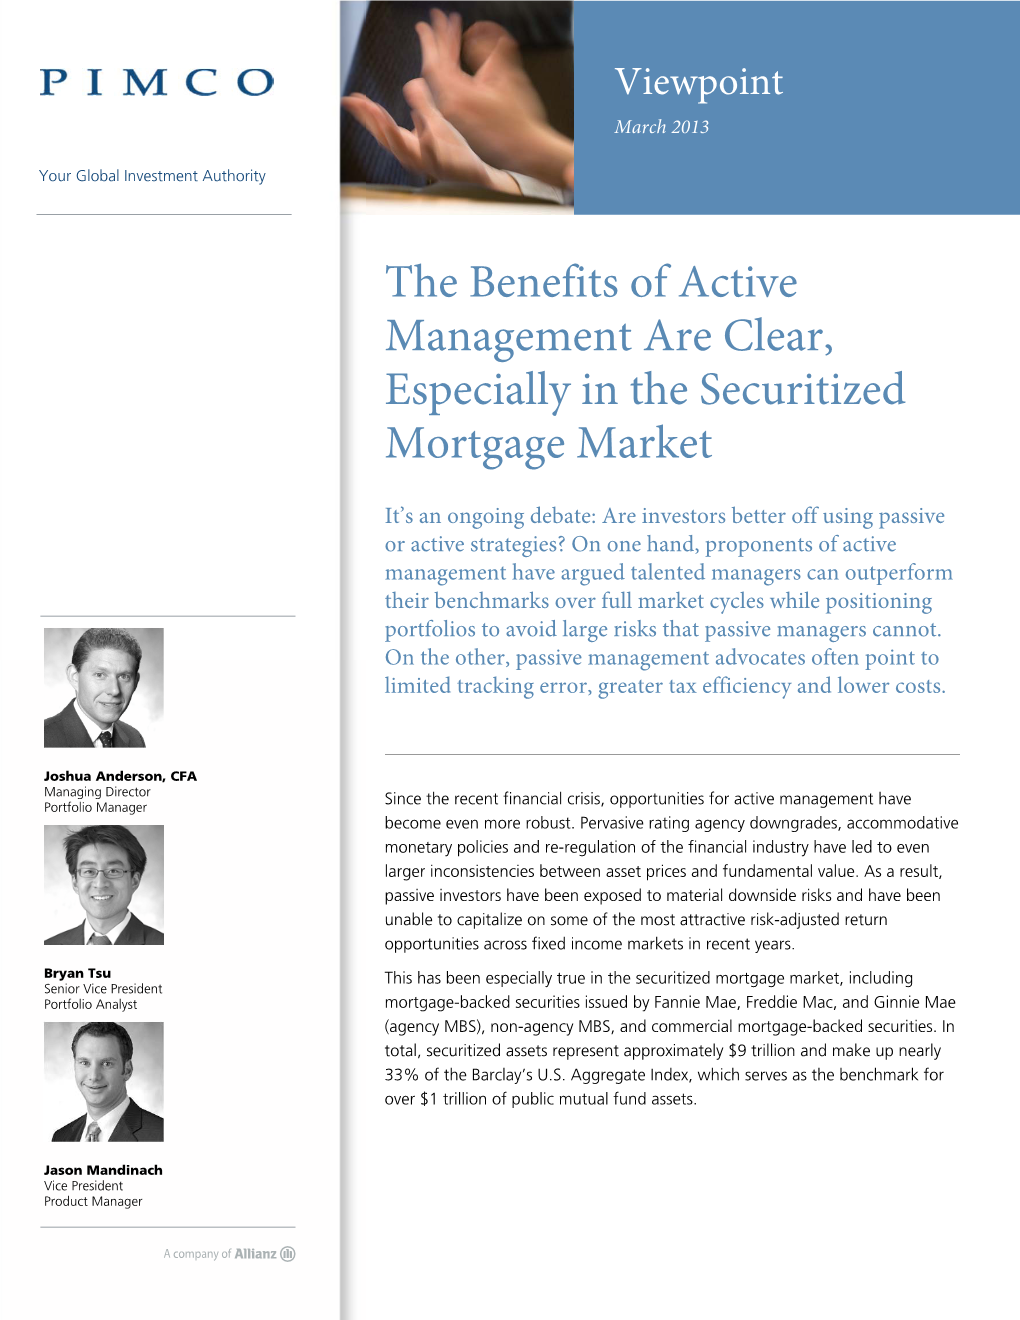 The Benefits of Active Management Are Clear, Especially in the Securitized Mortgage Market